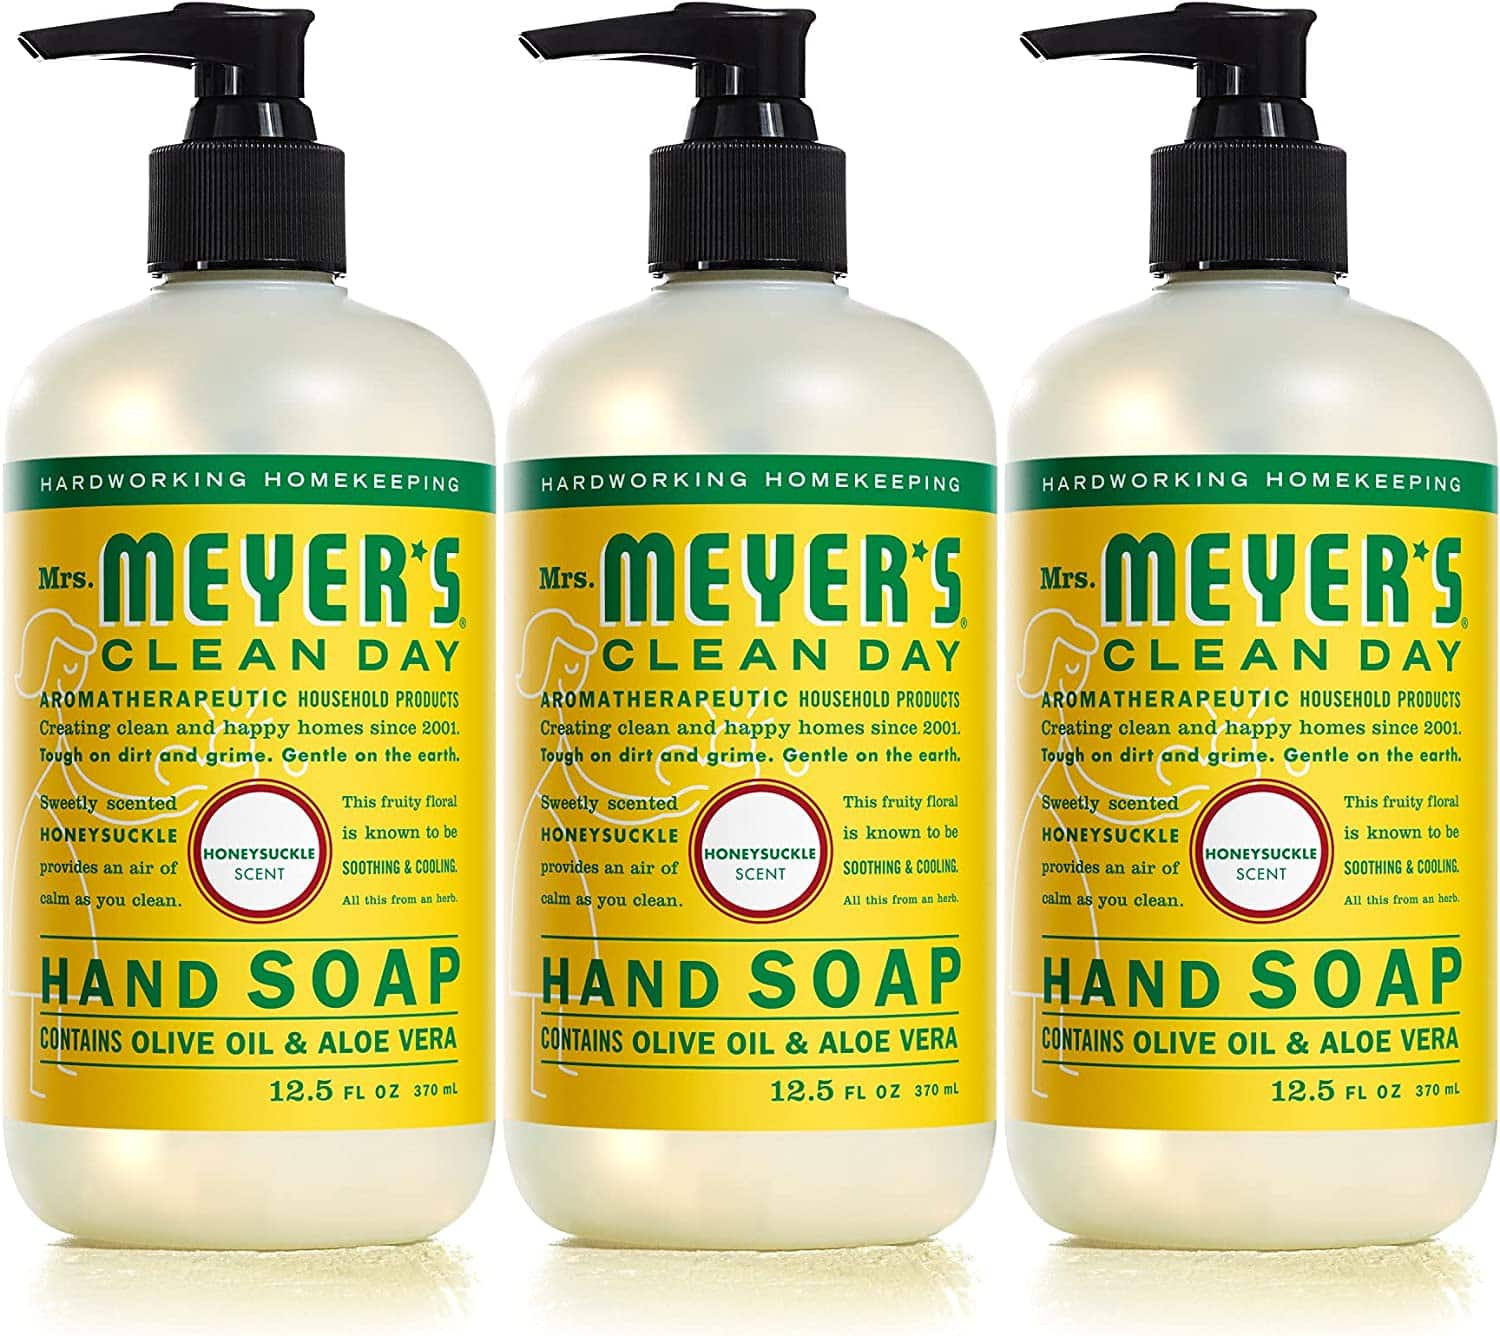 Mrs. Meyer’s Clean Day Hand Soap Logo